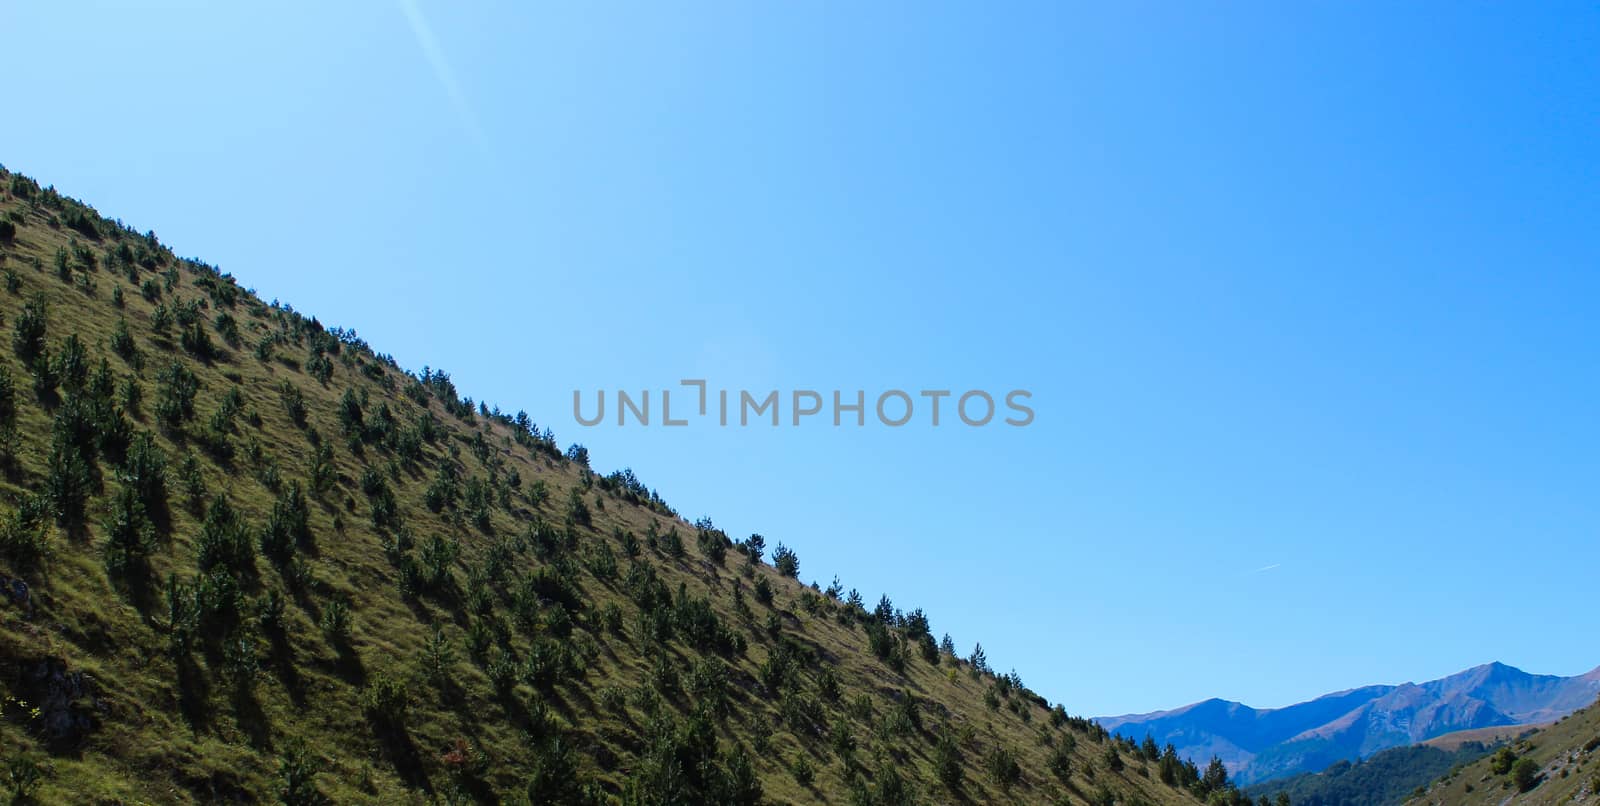 A steep hill forested with coniferous trees. In background mountains. Cloudless sky. On the way to the mountain Bjelasnica, Bosnia and Herzegovina.